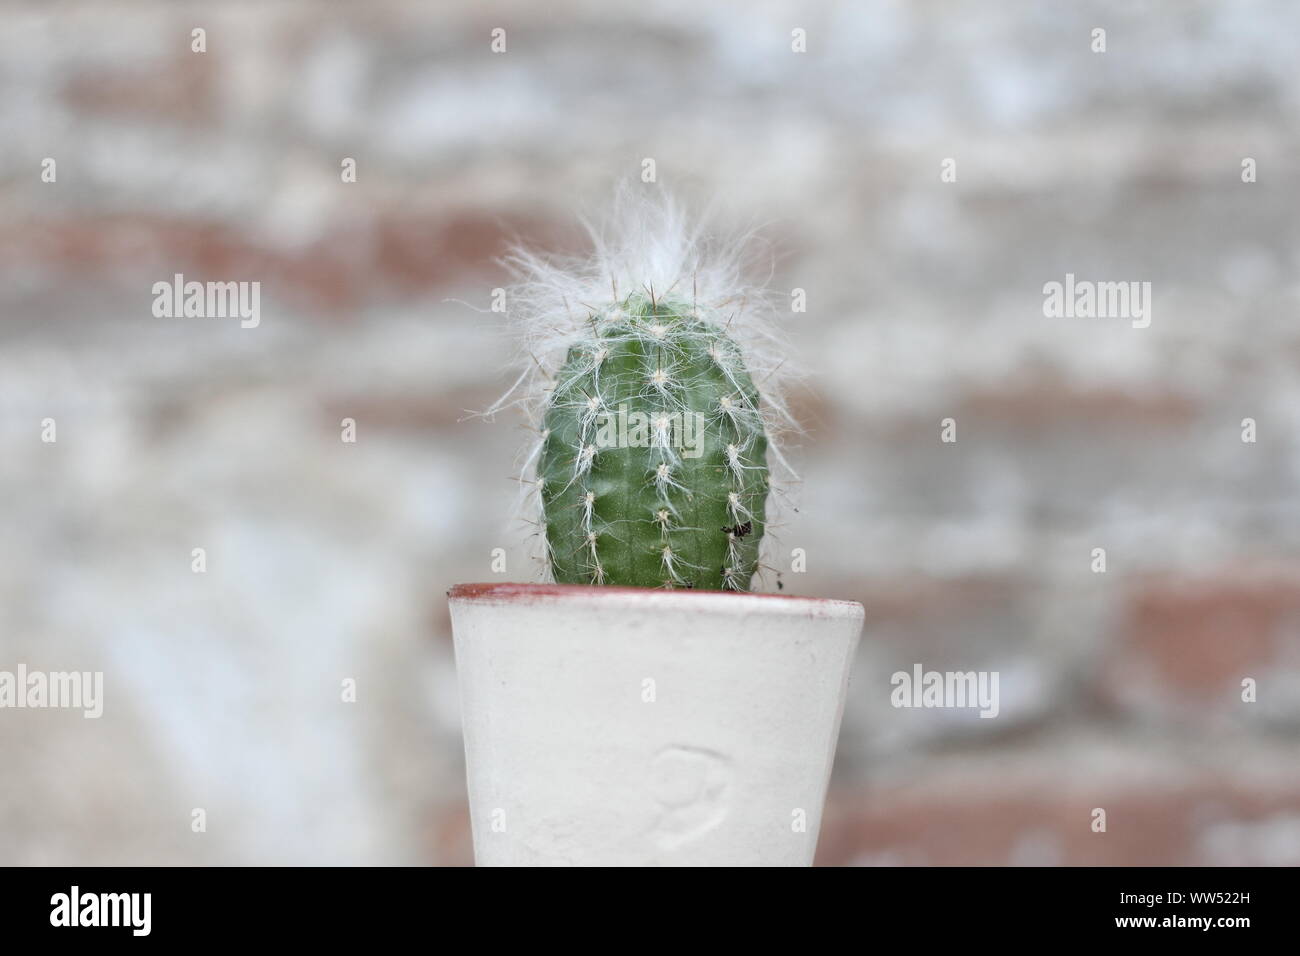 A small cactus with white hair, Stock Photo